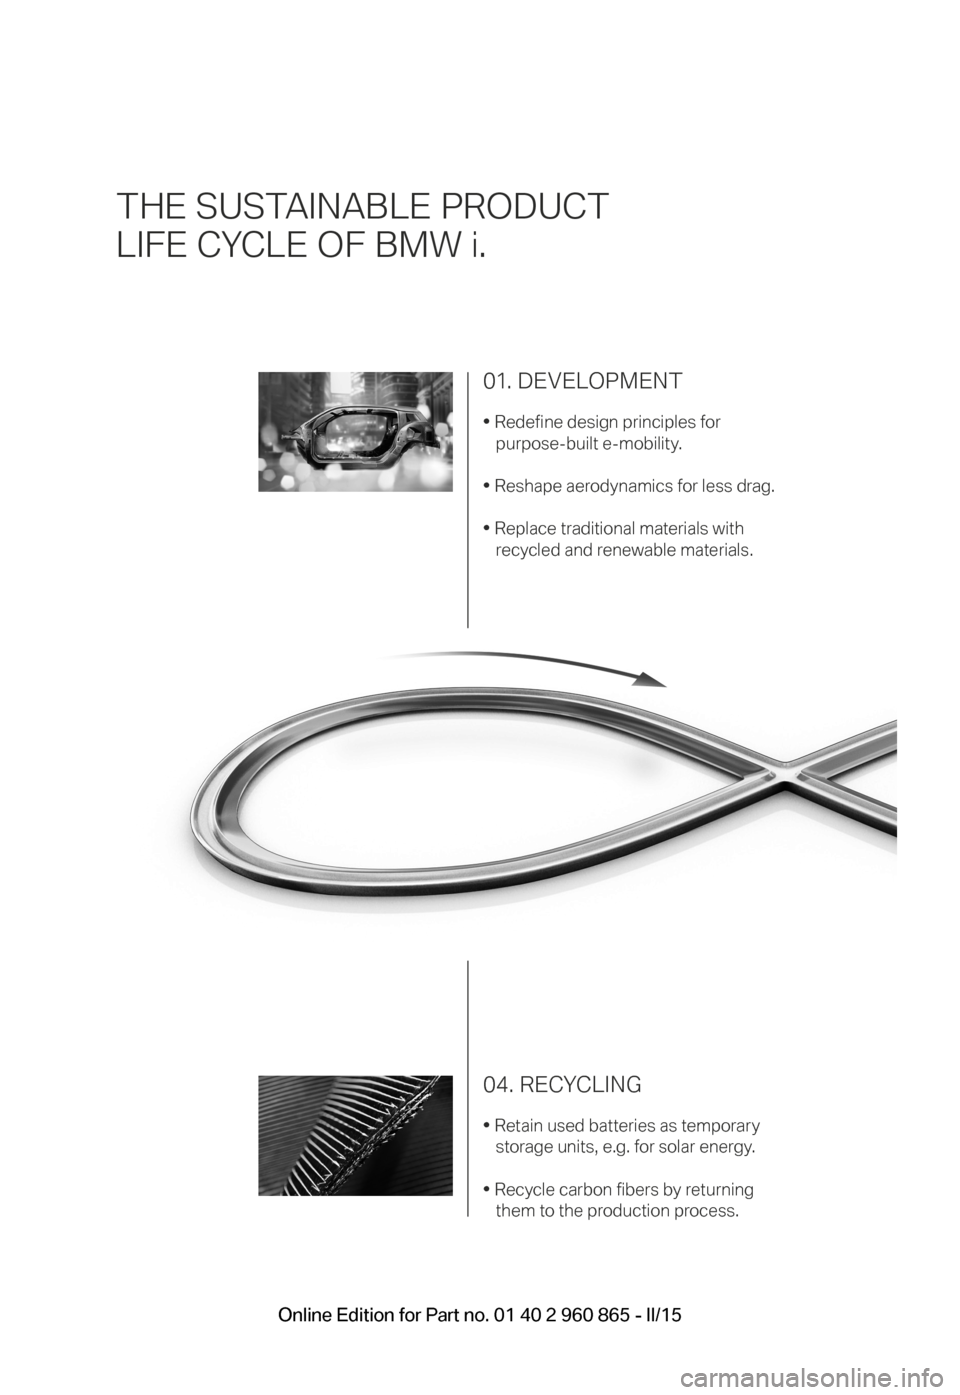 BMW I3 2015 I01 Owners Manual THE SUSTAINABLE PRODUCT  
LIFE CYCLE OF BMW i. 
01. DEVELOPMENT
• Redefine design principles for purpose-built e-mobility.
• Reshape aerodynamics for less drag. 
• Replace traditional materials 